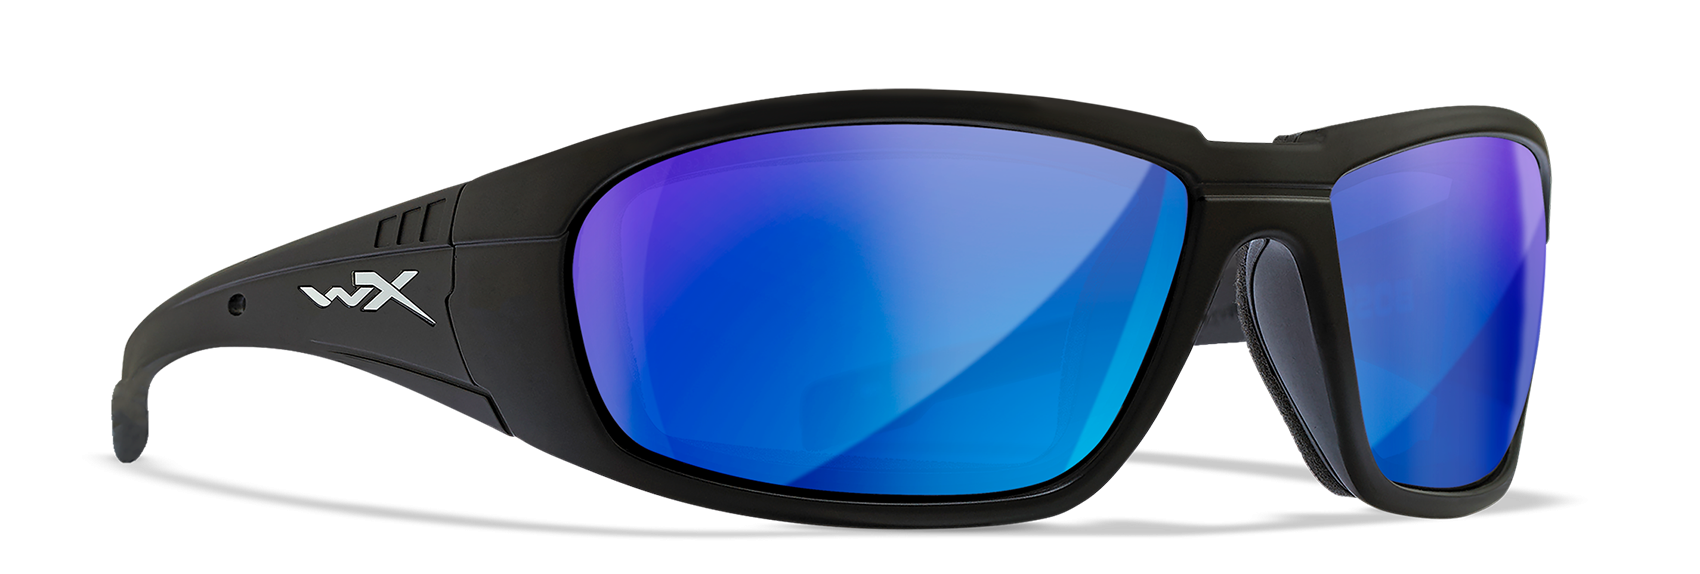 Wiley X WX Boss Blue Mirror Polycarbonate Sunglasses